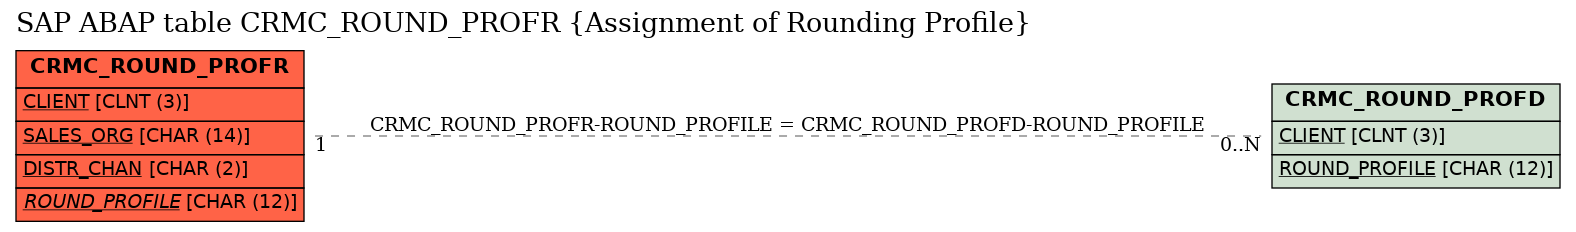 E-R Diagram for table CRMC_ROUND_PROFR (Assignment of Rounding Profile)